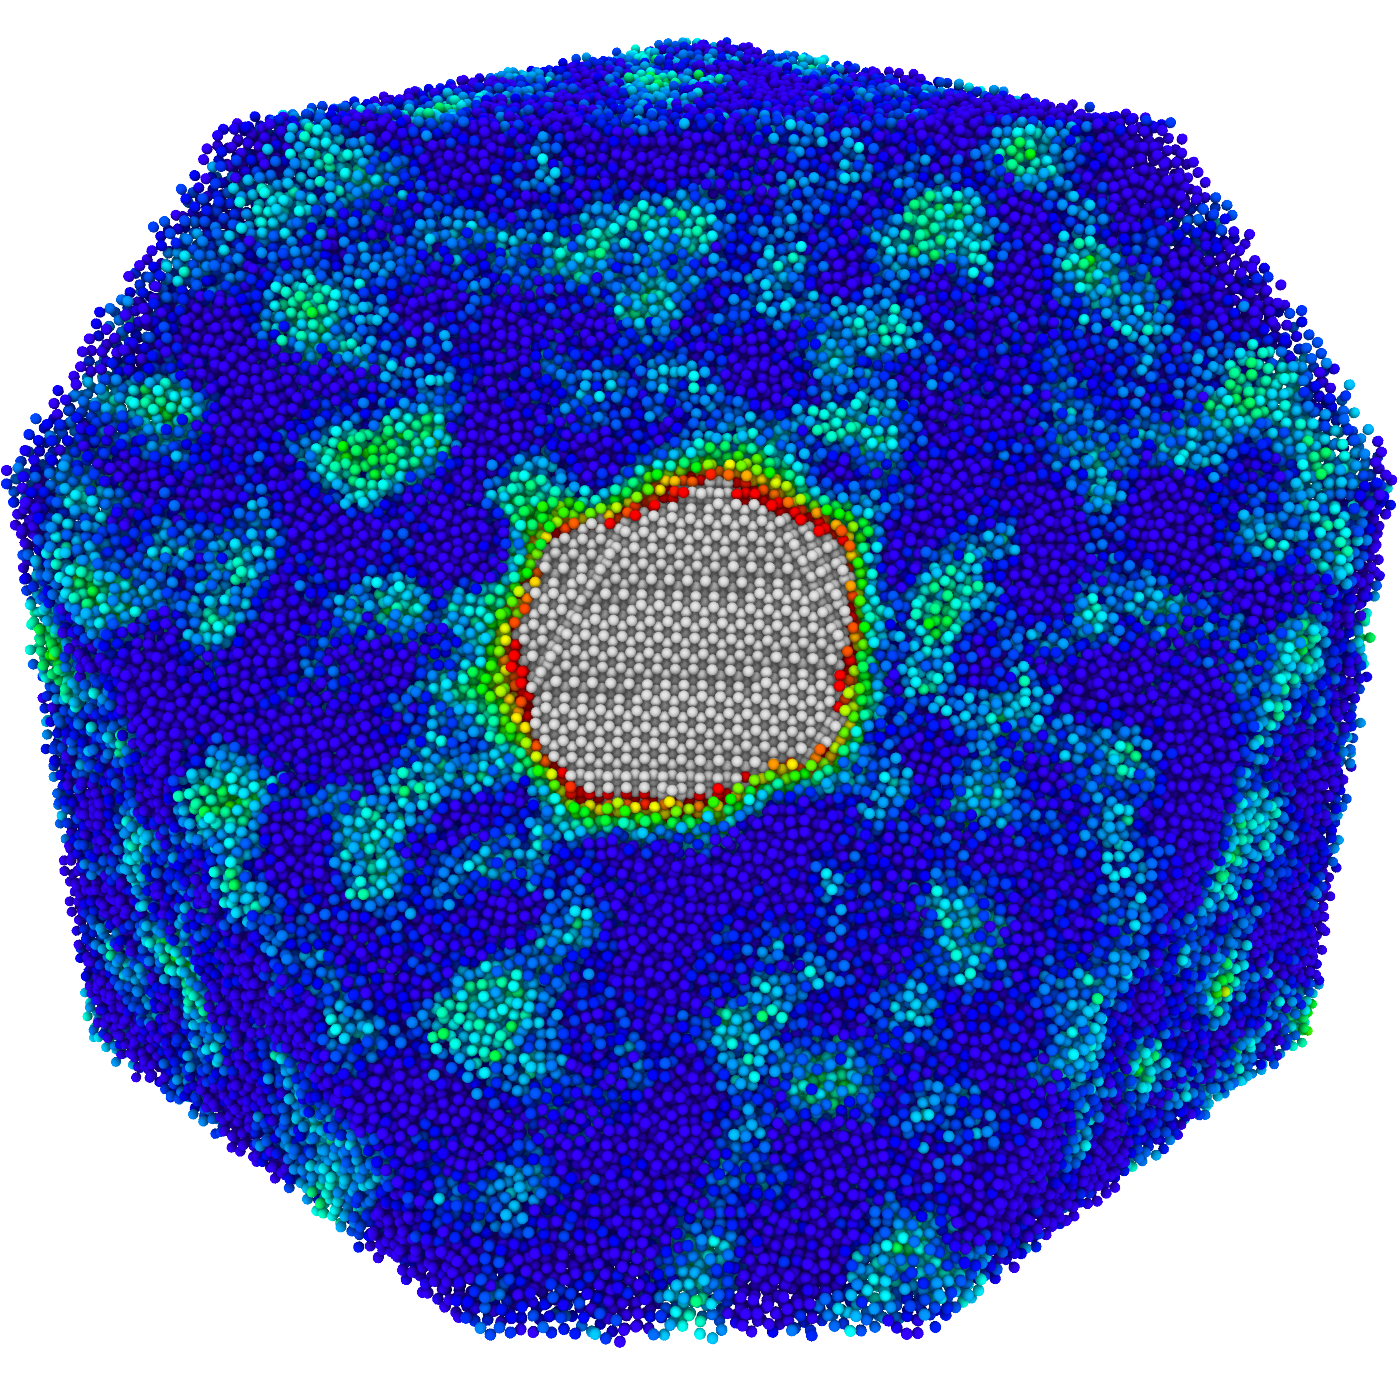 Initial stages of silicon growth. Liquid atoms are colored according to a Machine-Learning defined structural parameter. Atoms in the crystalline phase are colored in gray.